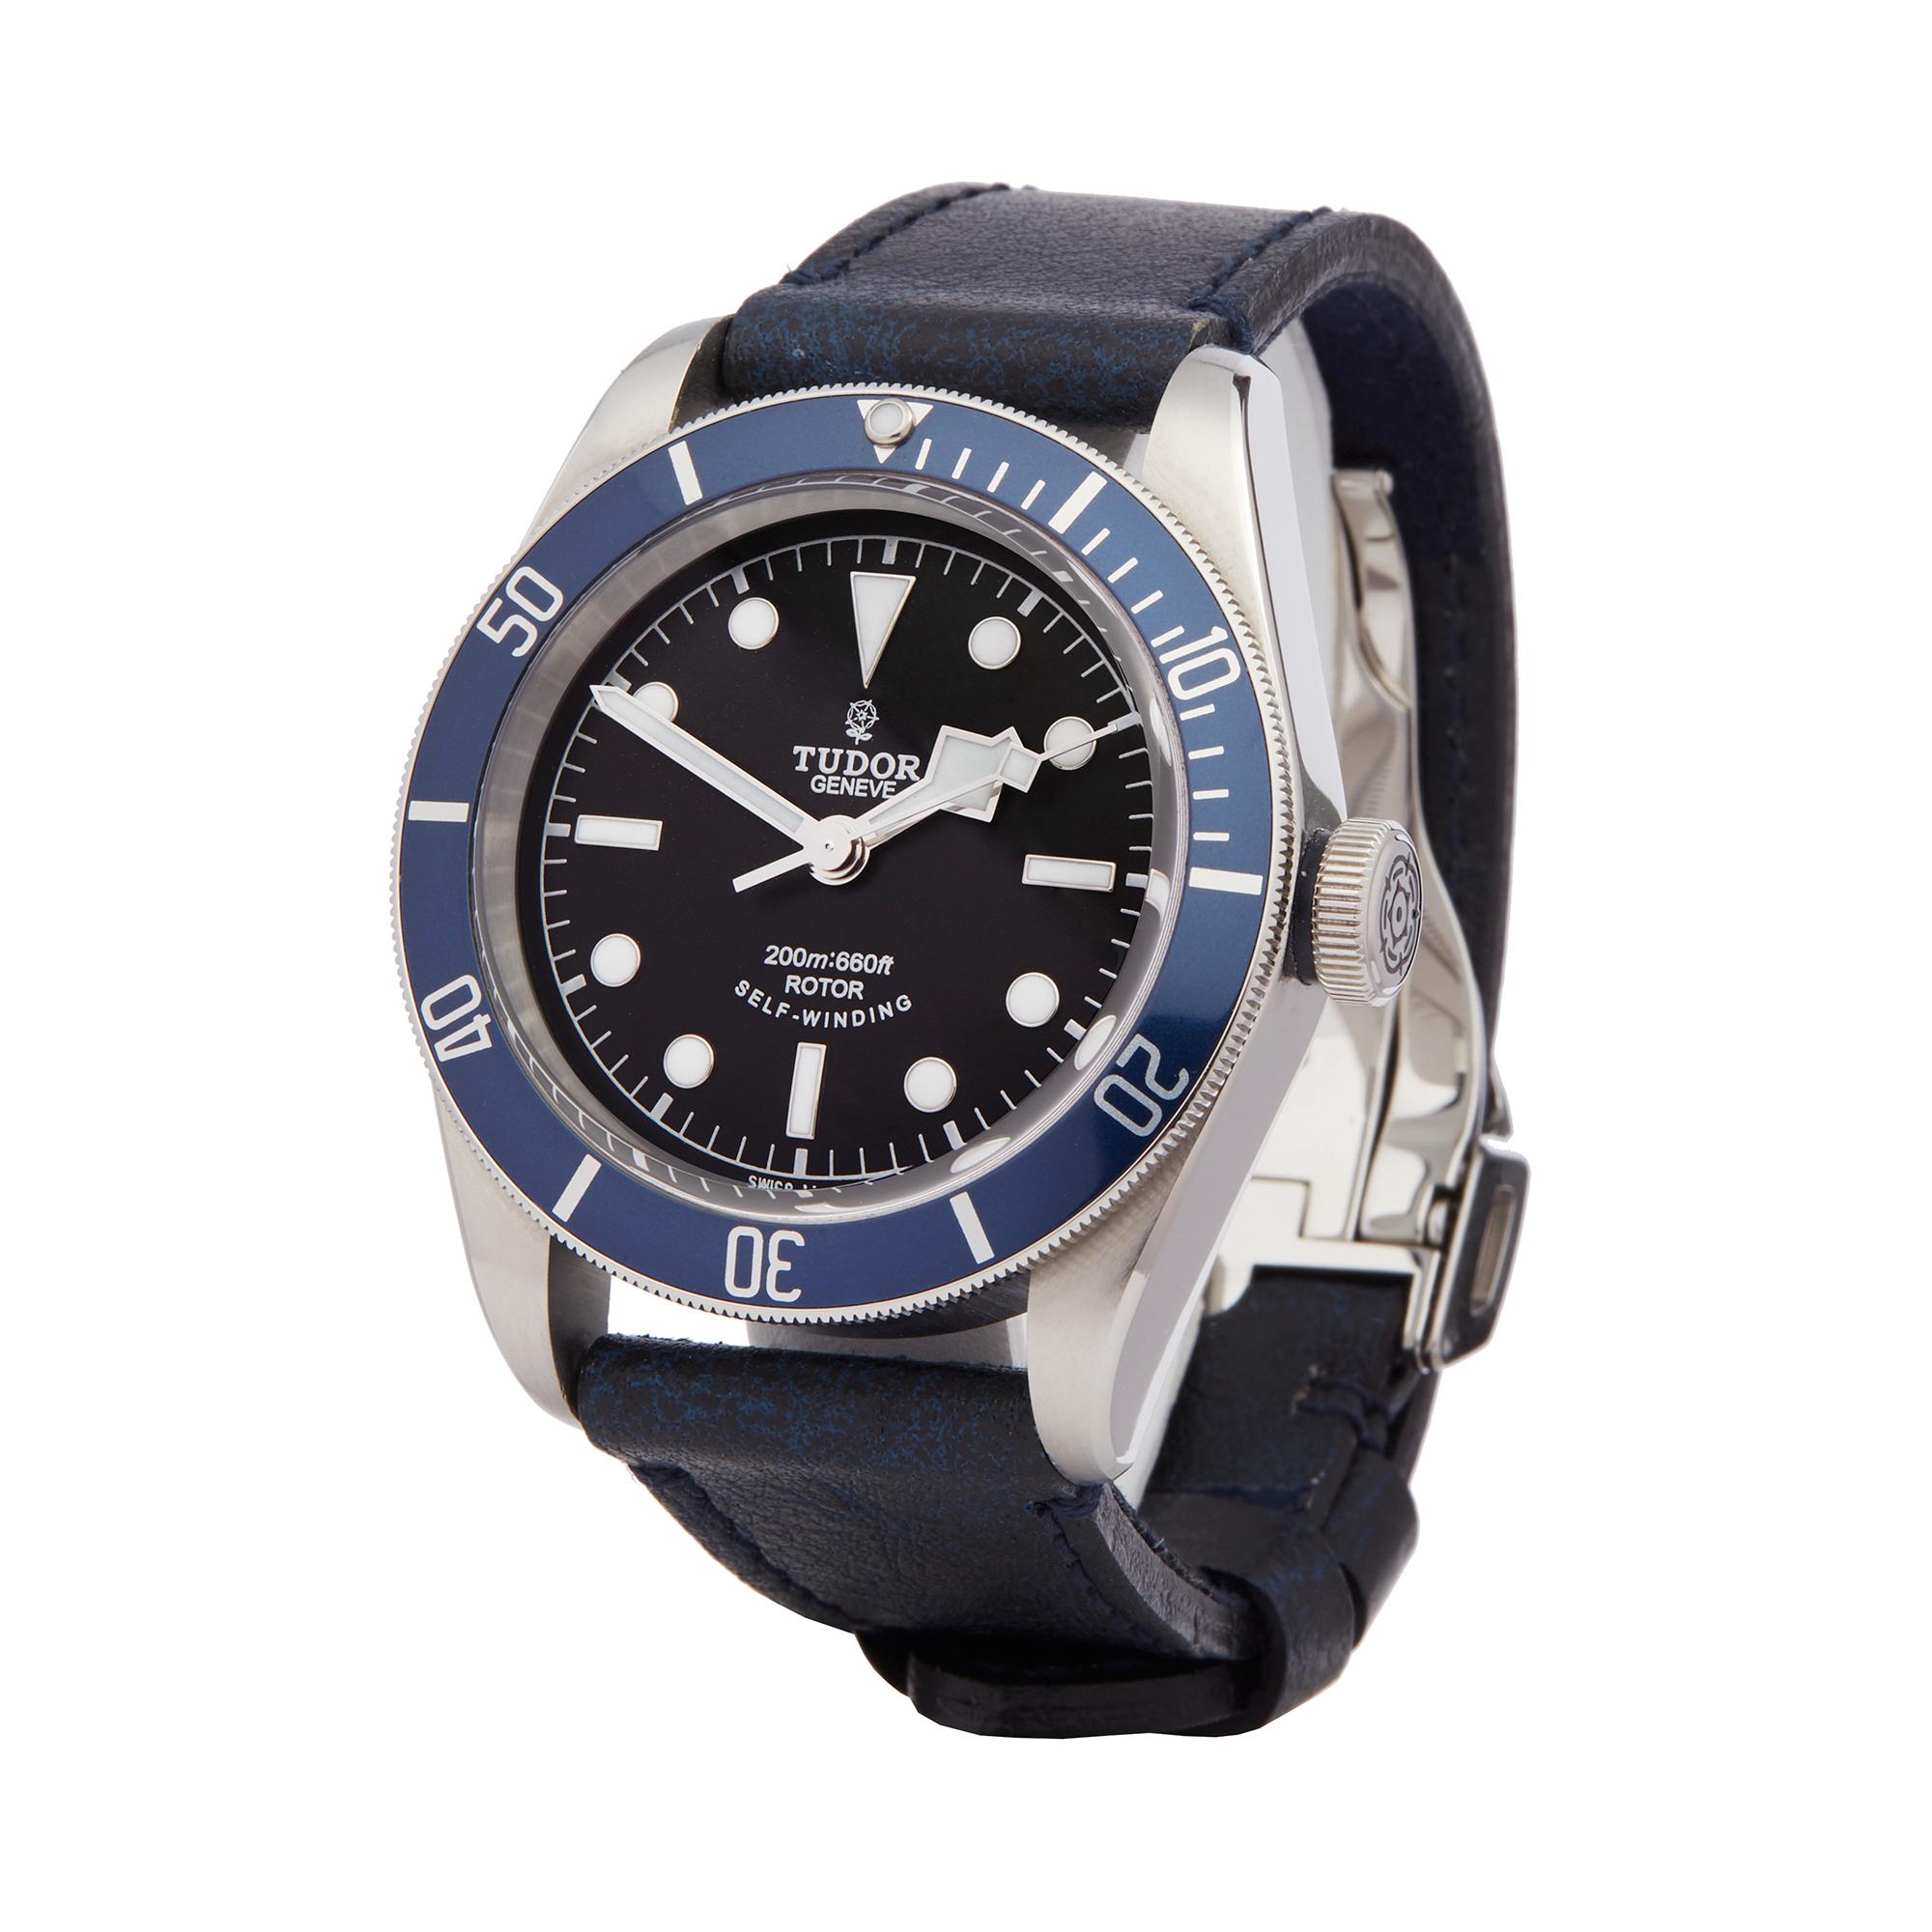 Ref: COM2260
Manufacturer: Tudor
Model: Black Bay
Model Ref: 79220B
Age: July 2018
Gender: Mens
Complete With: Box, Manuals, Guarantee, Tags
Dial: Black Other
Glass: Sapphire Crystal
Movement: Automatic
Water Resistance: To Manufacturers